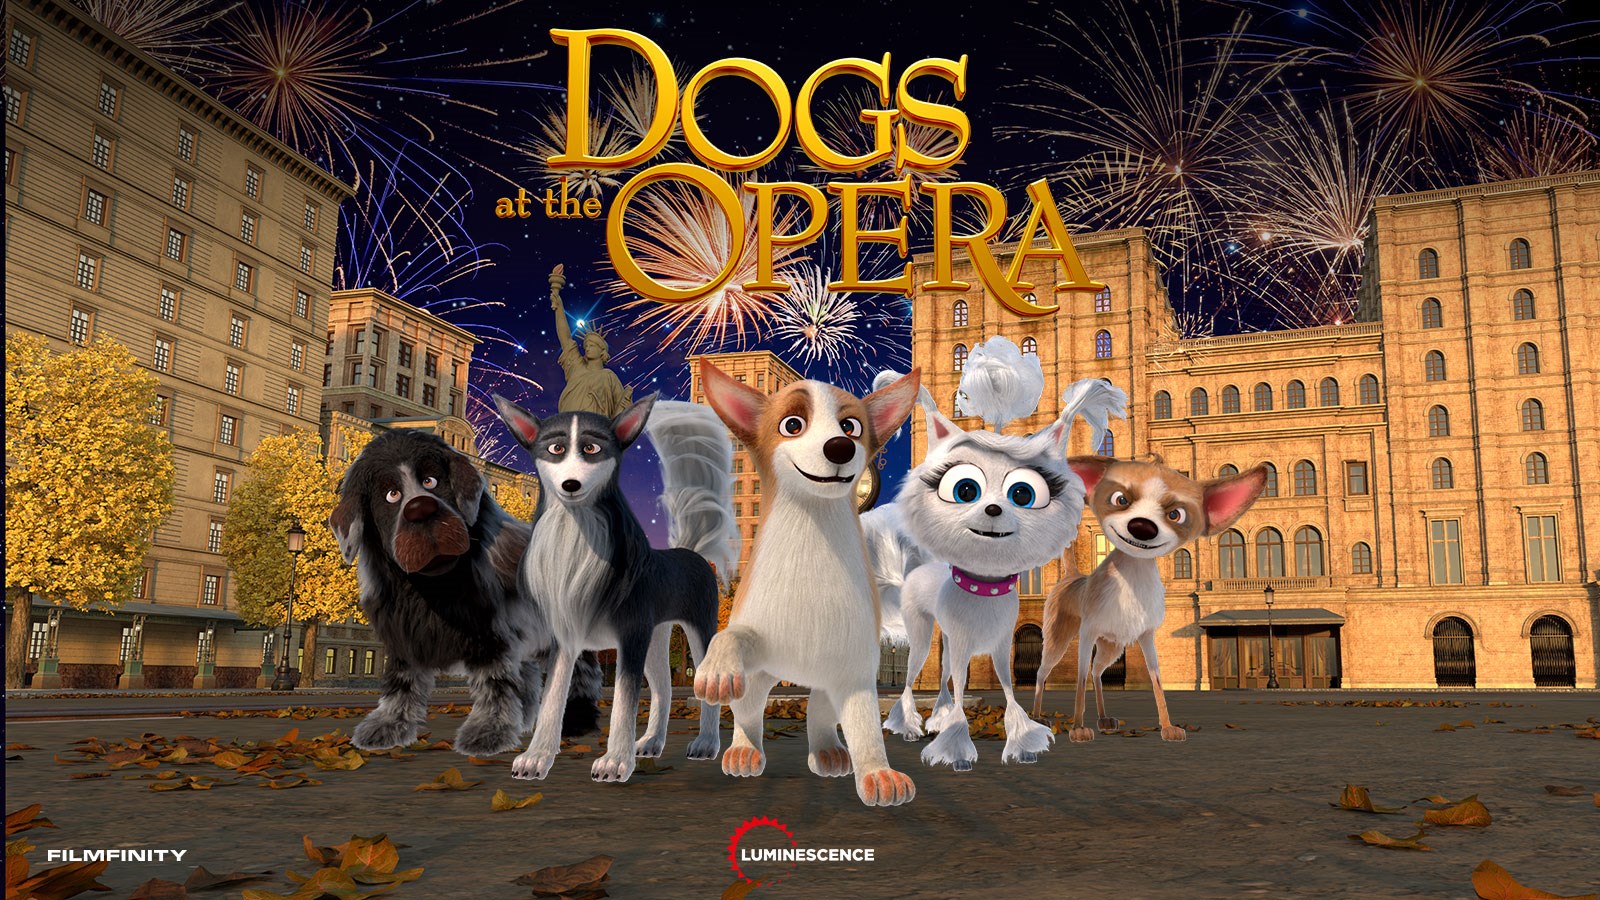 DOGS AT THE OPERA